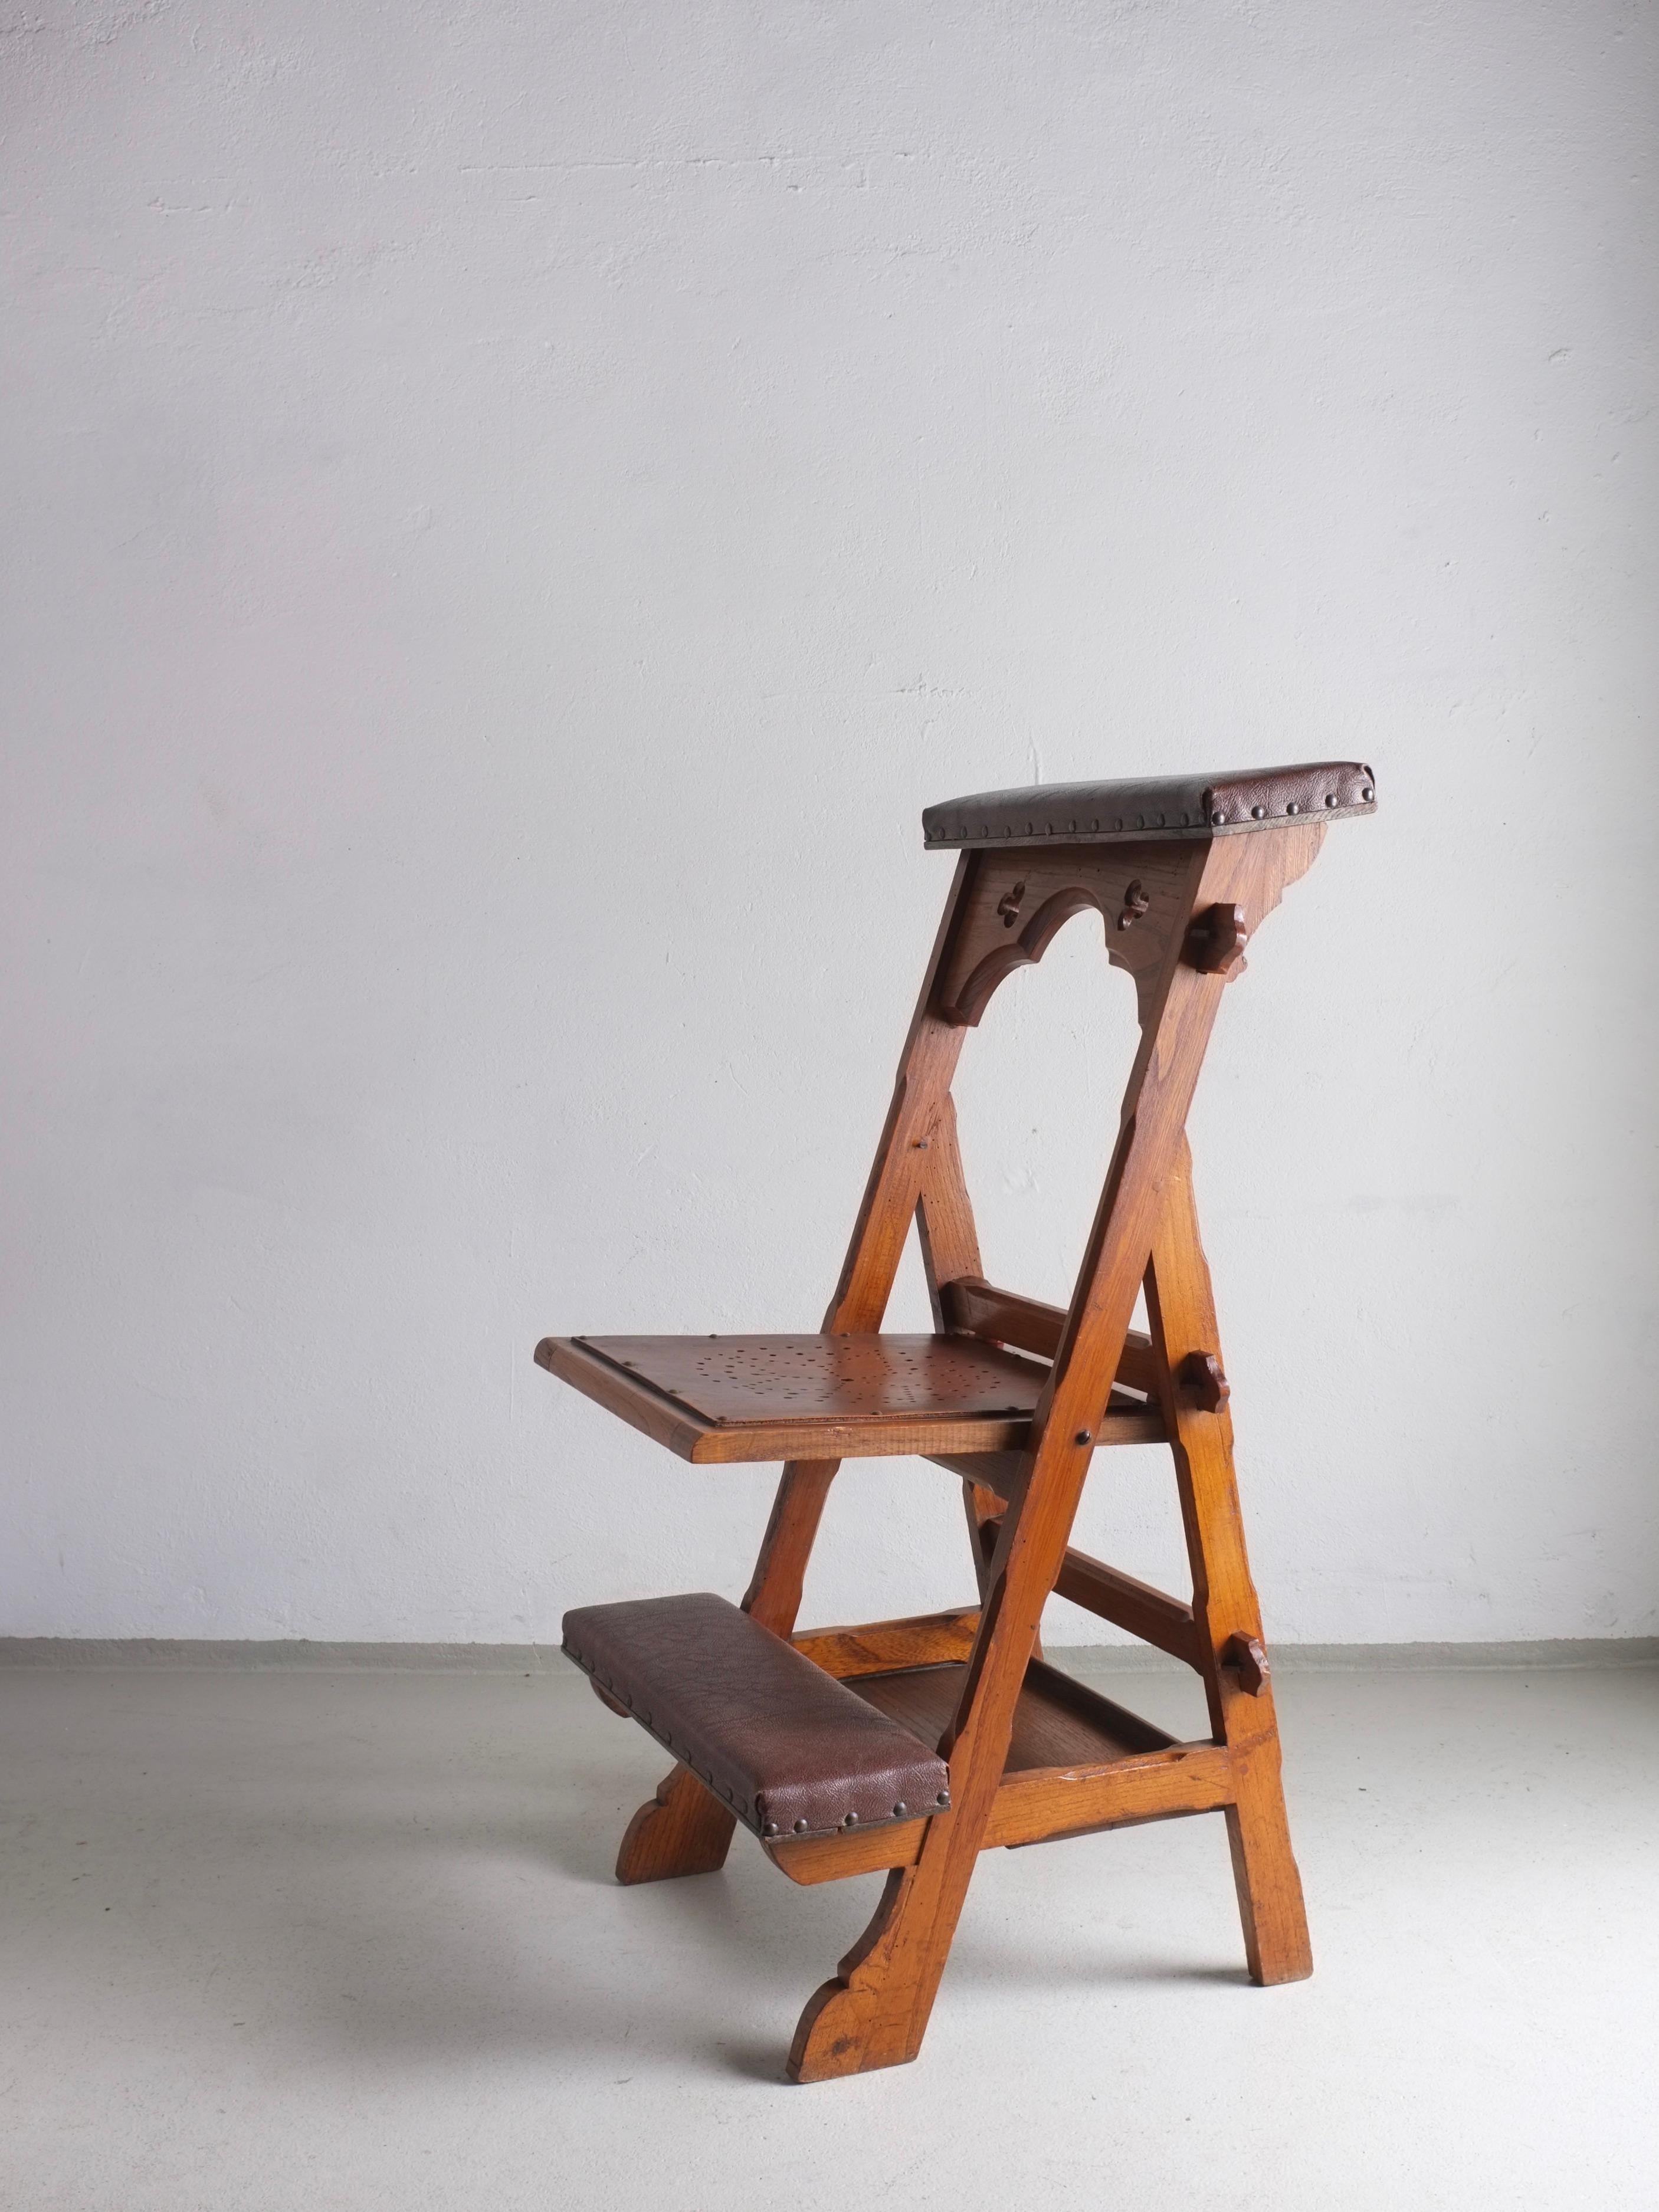 Mid-20th Century Carved Wood Folding Chair with Shelf, Netherlands, 1950s